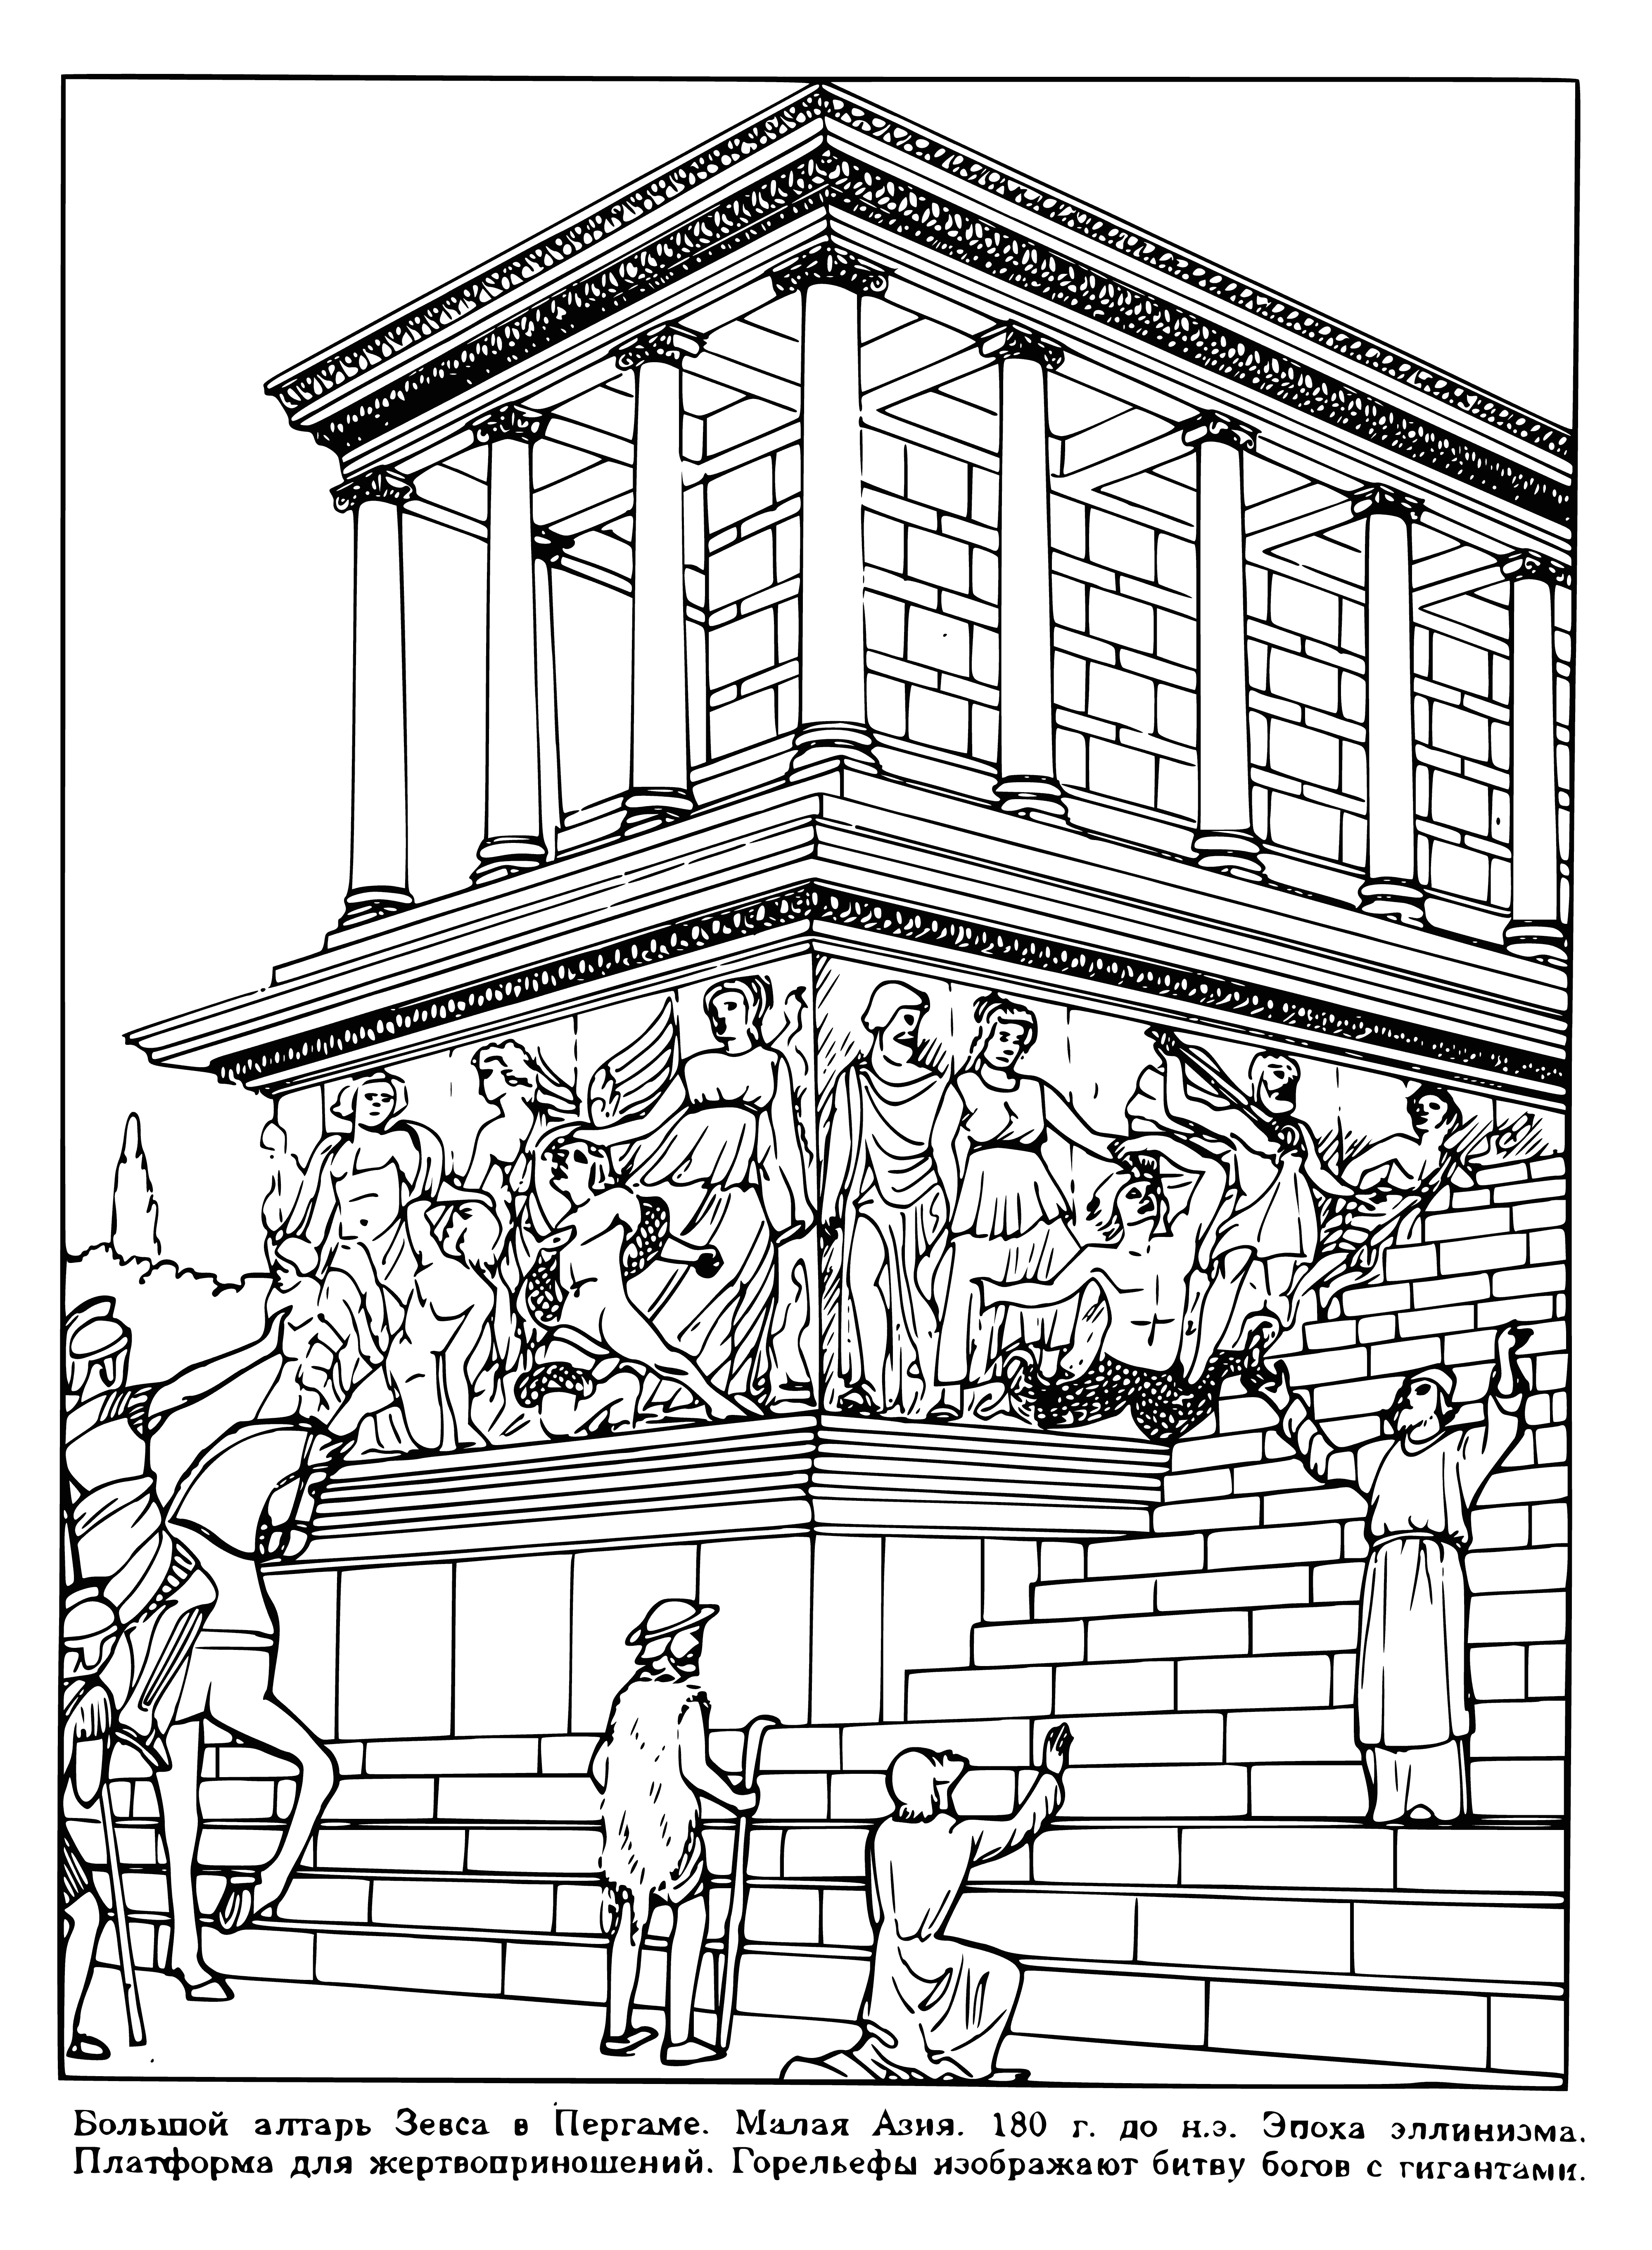 coloring page: Altar of Zeus is a religious platform decorated with reliefs of scenes from Greek mythology & topped by a statue of Zeus & a bowl for offerings.